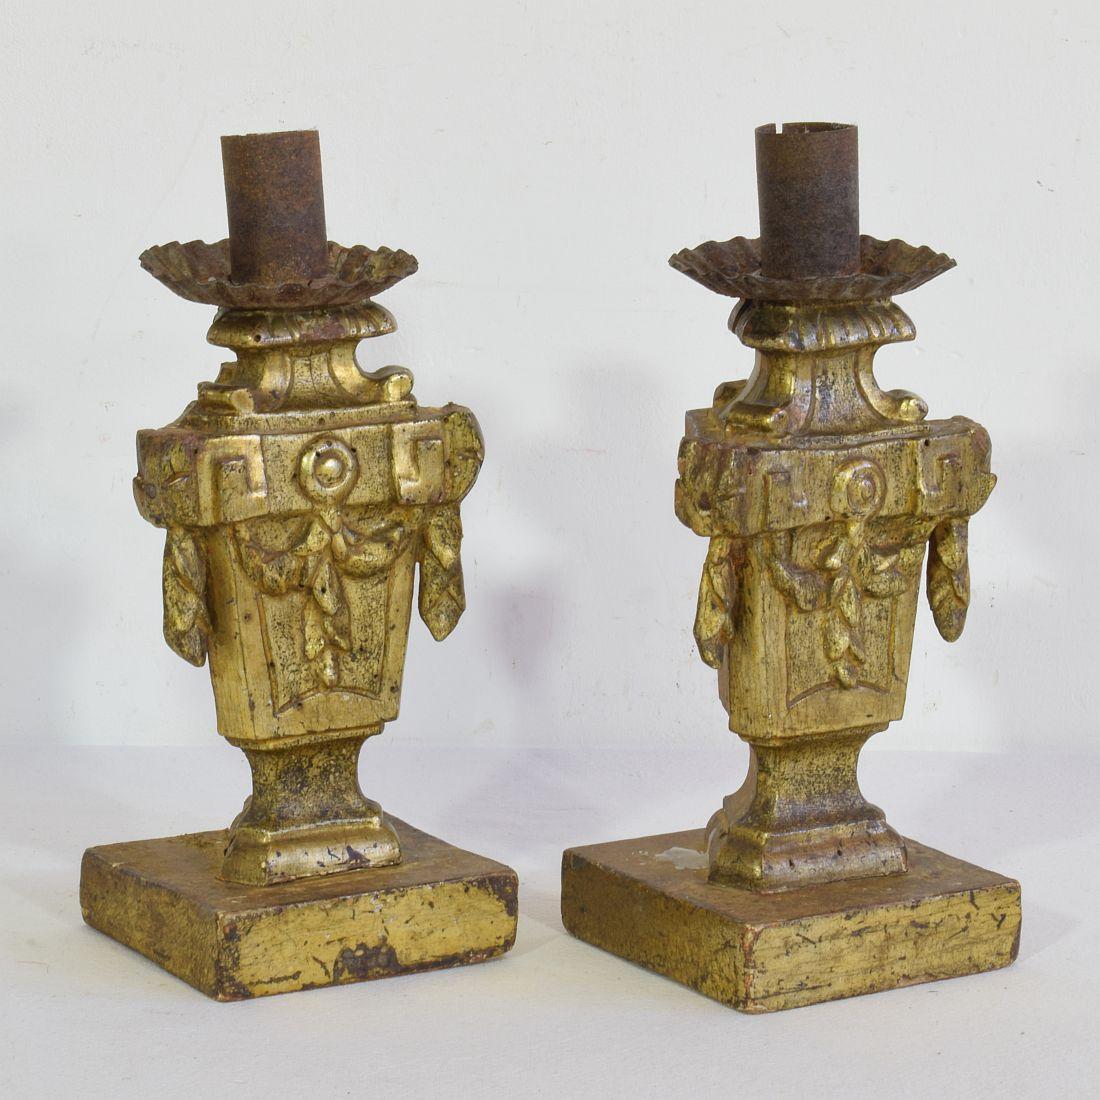 Wood Pair of Small 18th Century Italian Neoclassical Candleholders / Candlesticks For Sale